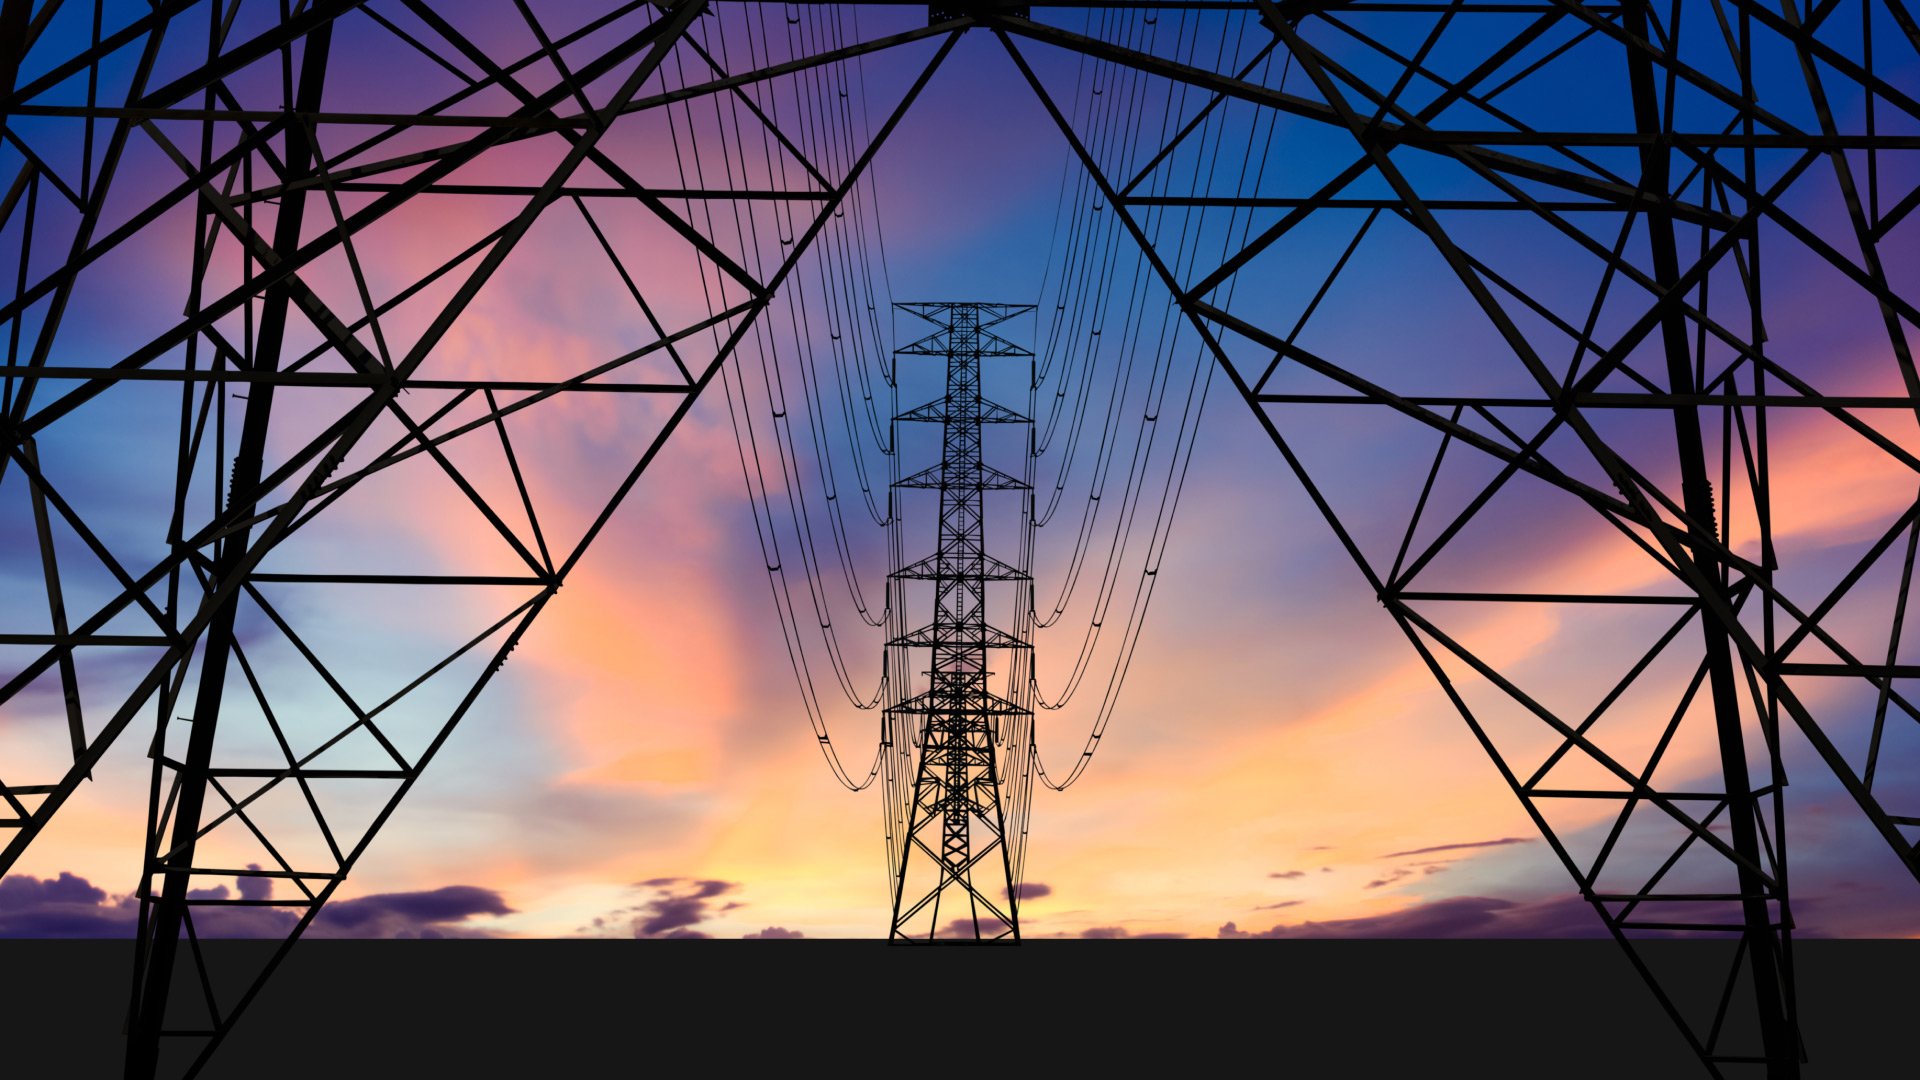 electrical transmission towers and wires at dusk